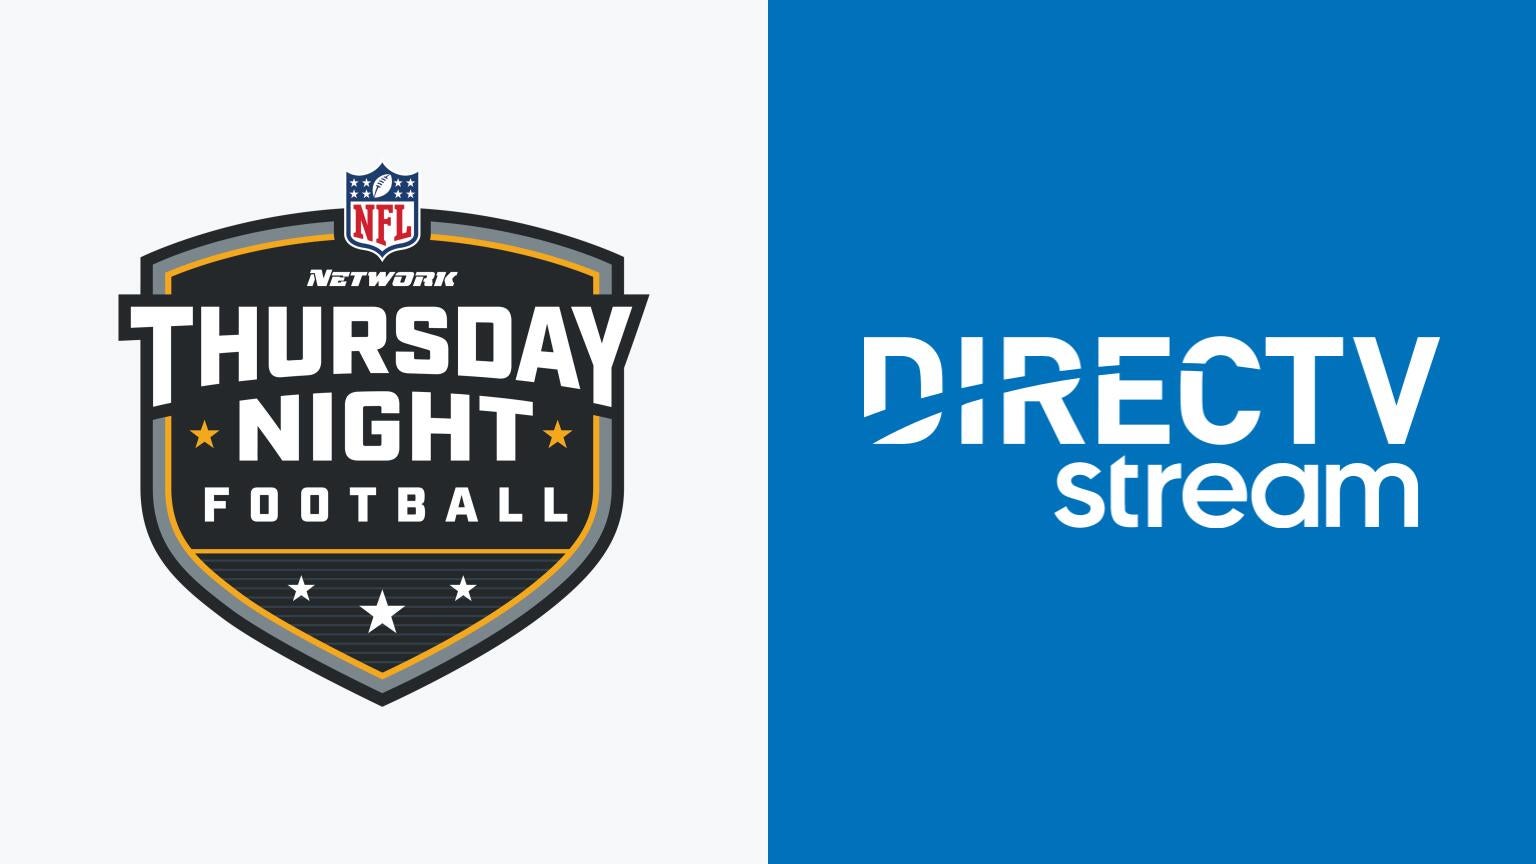 Can You Watch Thursday Night Football on NFL Network with DIRECTV